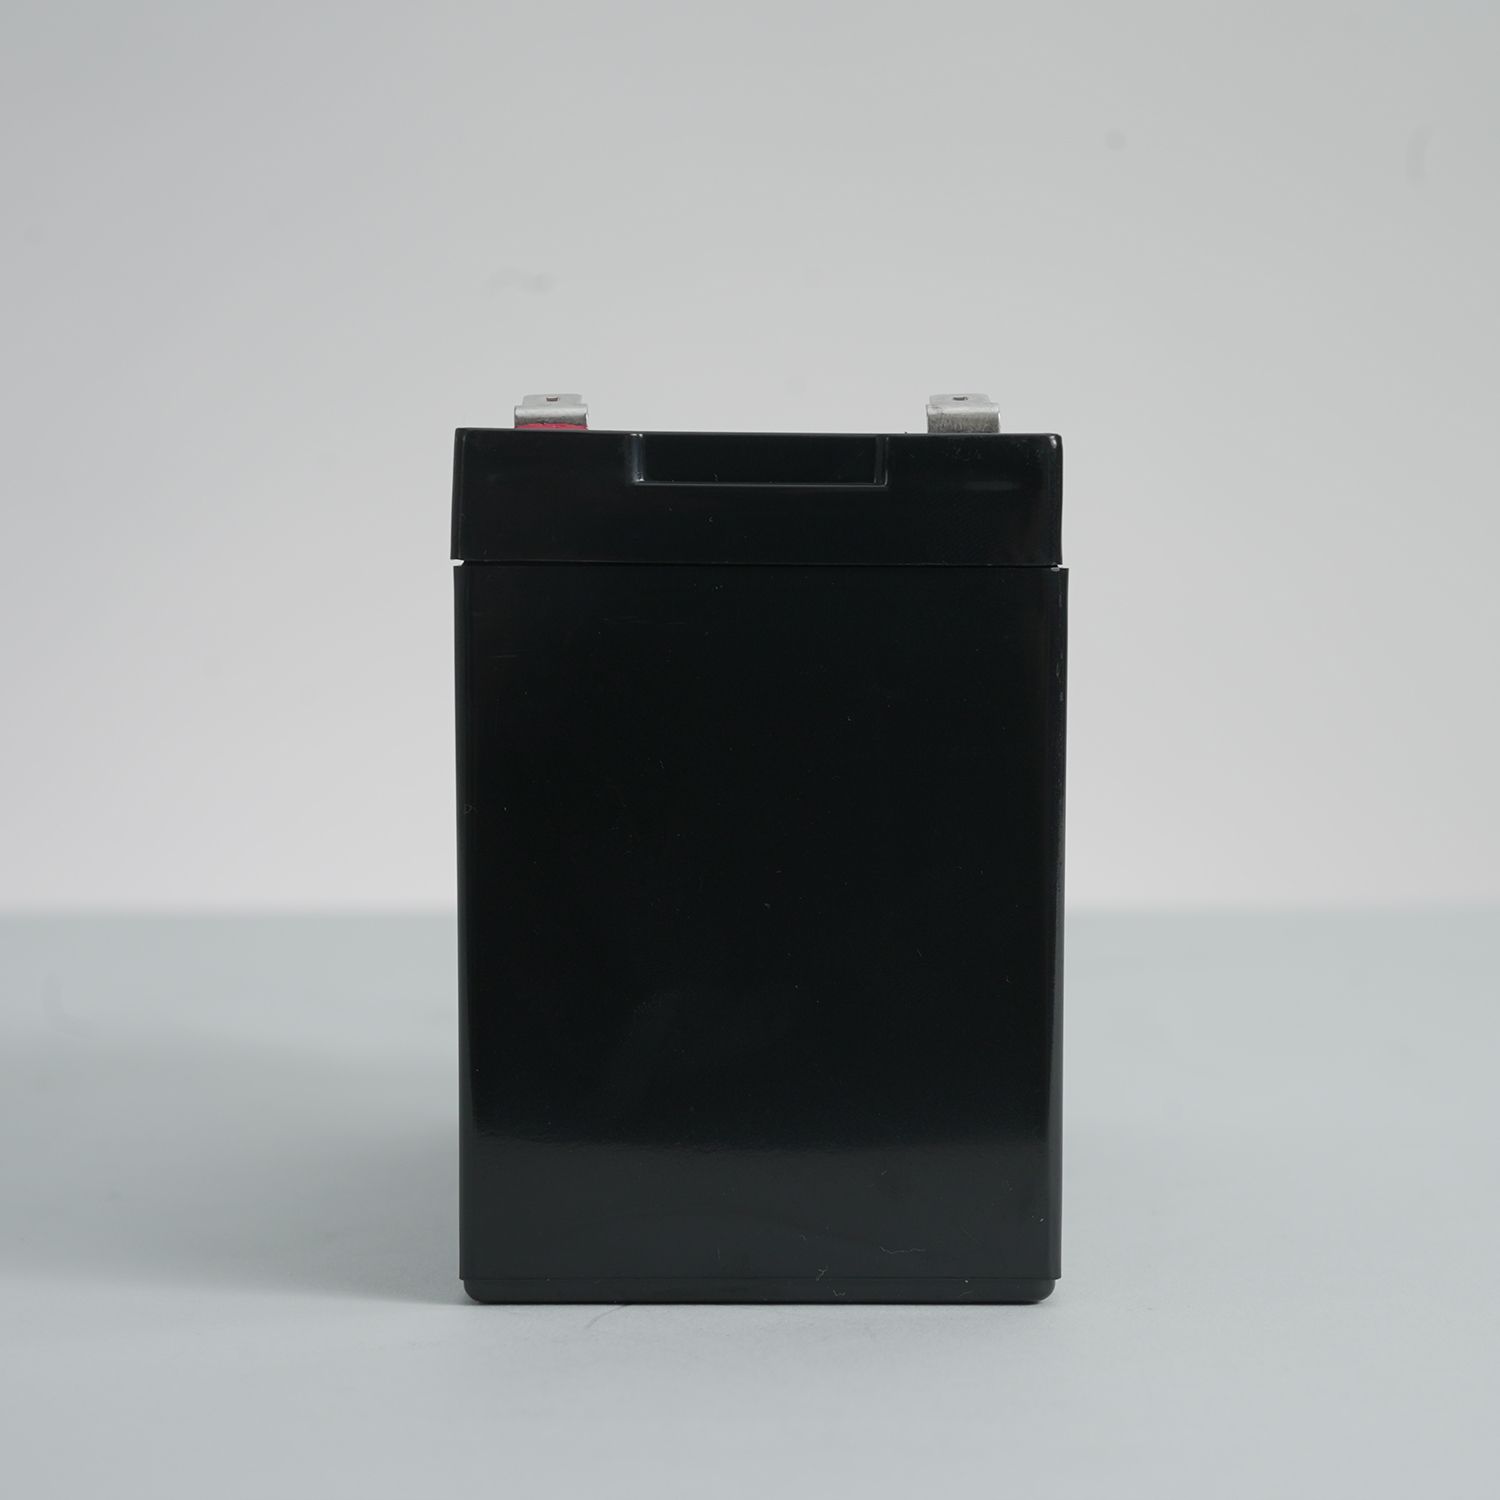 12ah LiFePO4 Li-ion Motorcycle Starting Battery with Good Quality China Professional OEM Battery Manufacturer 12v 7ah lifepo4 battery